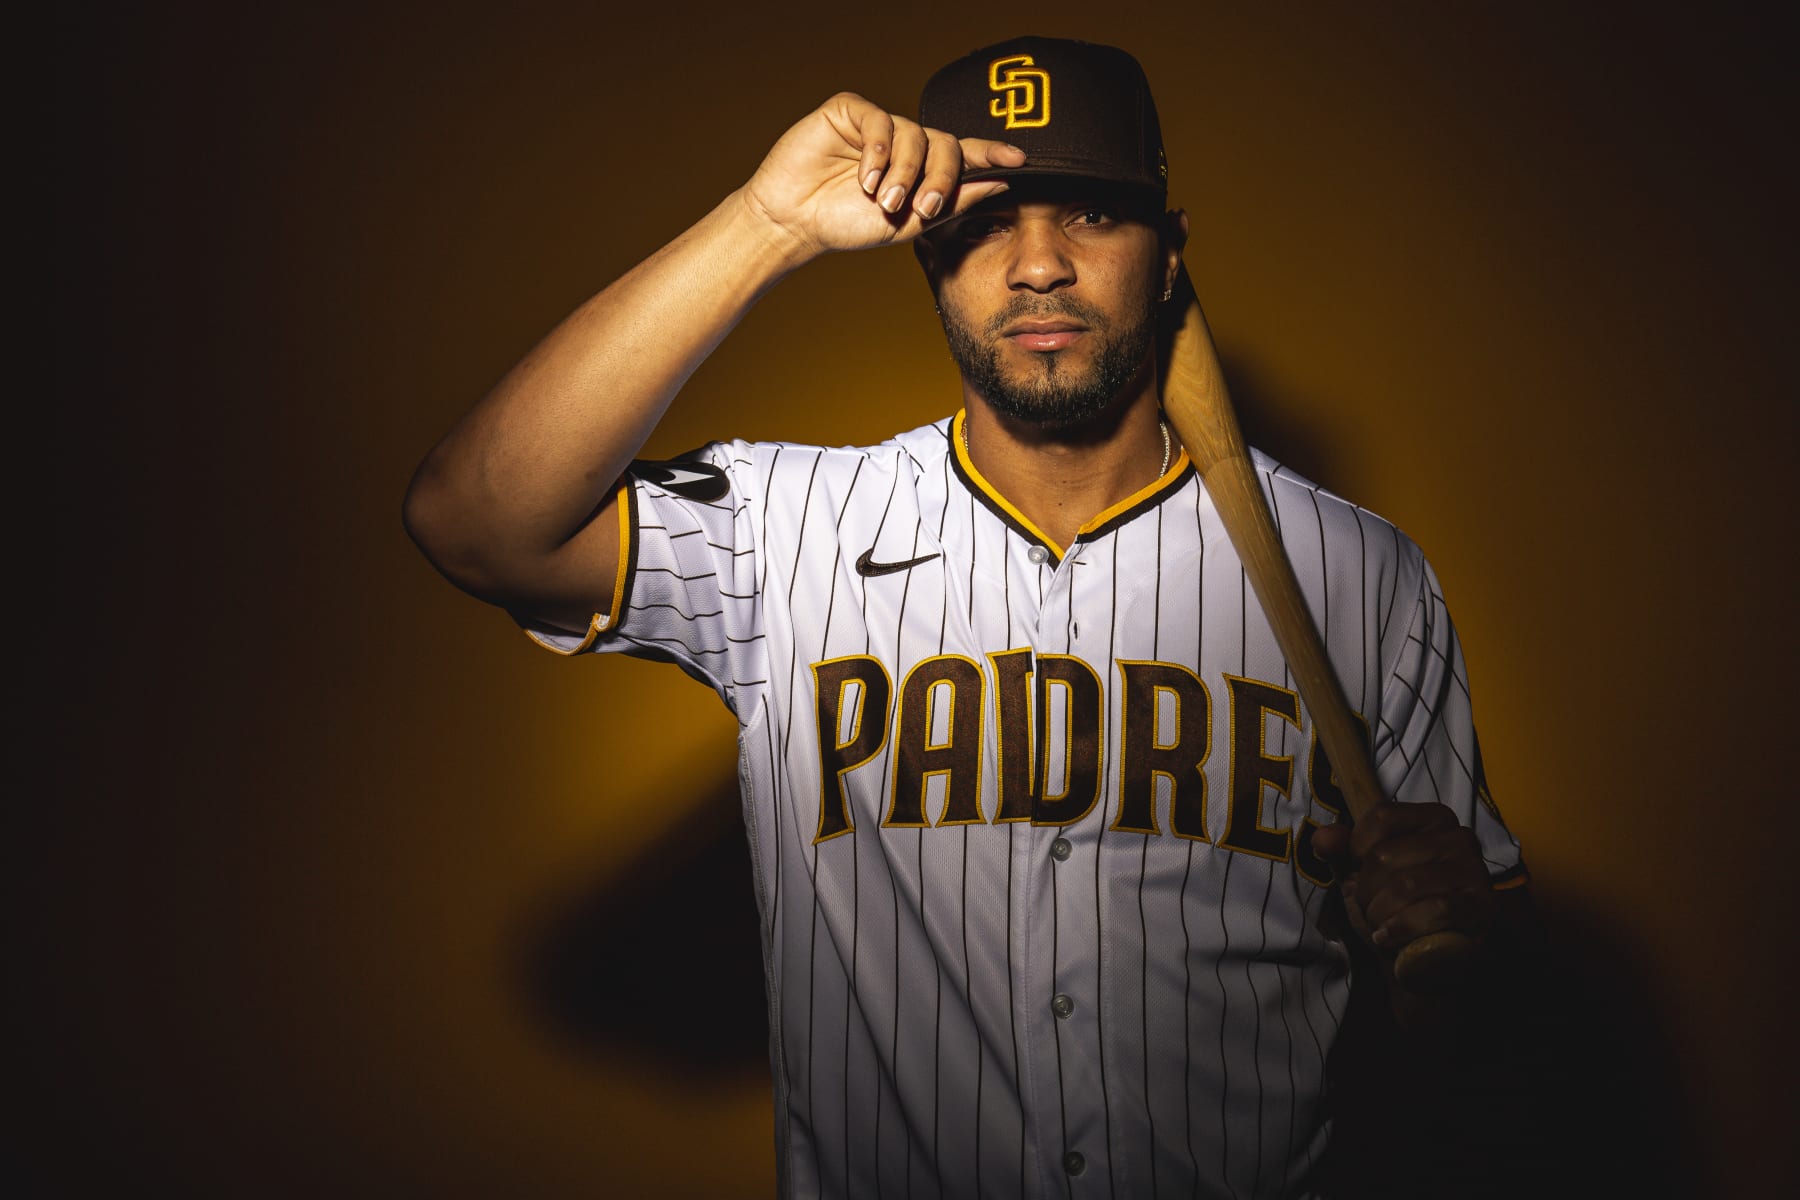 Following up my Slam Diego video from yesterday with some Slam Diego art!  Love this team and comminity. : r/Padres